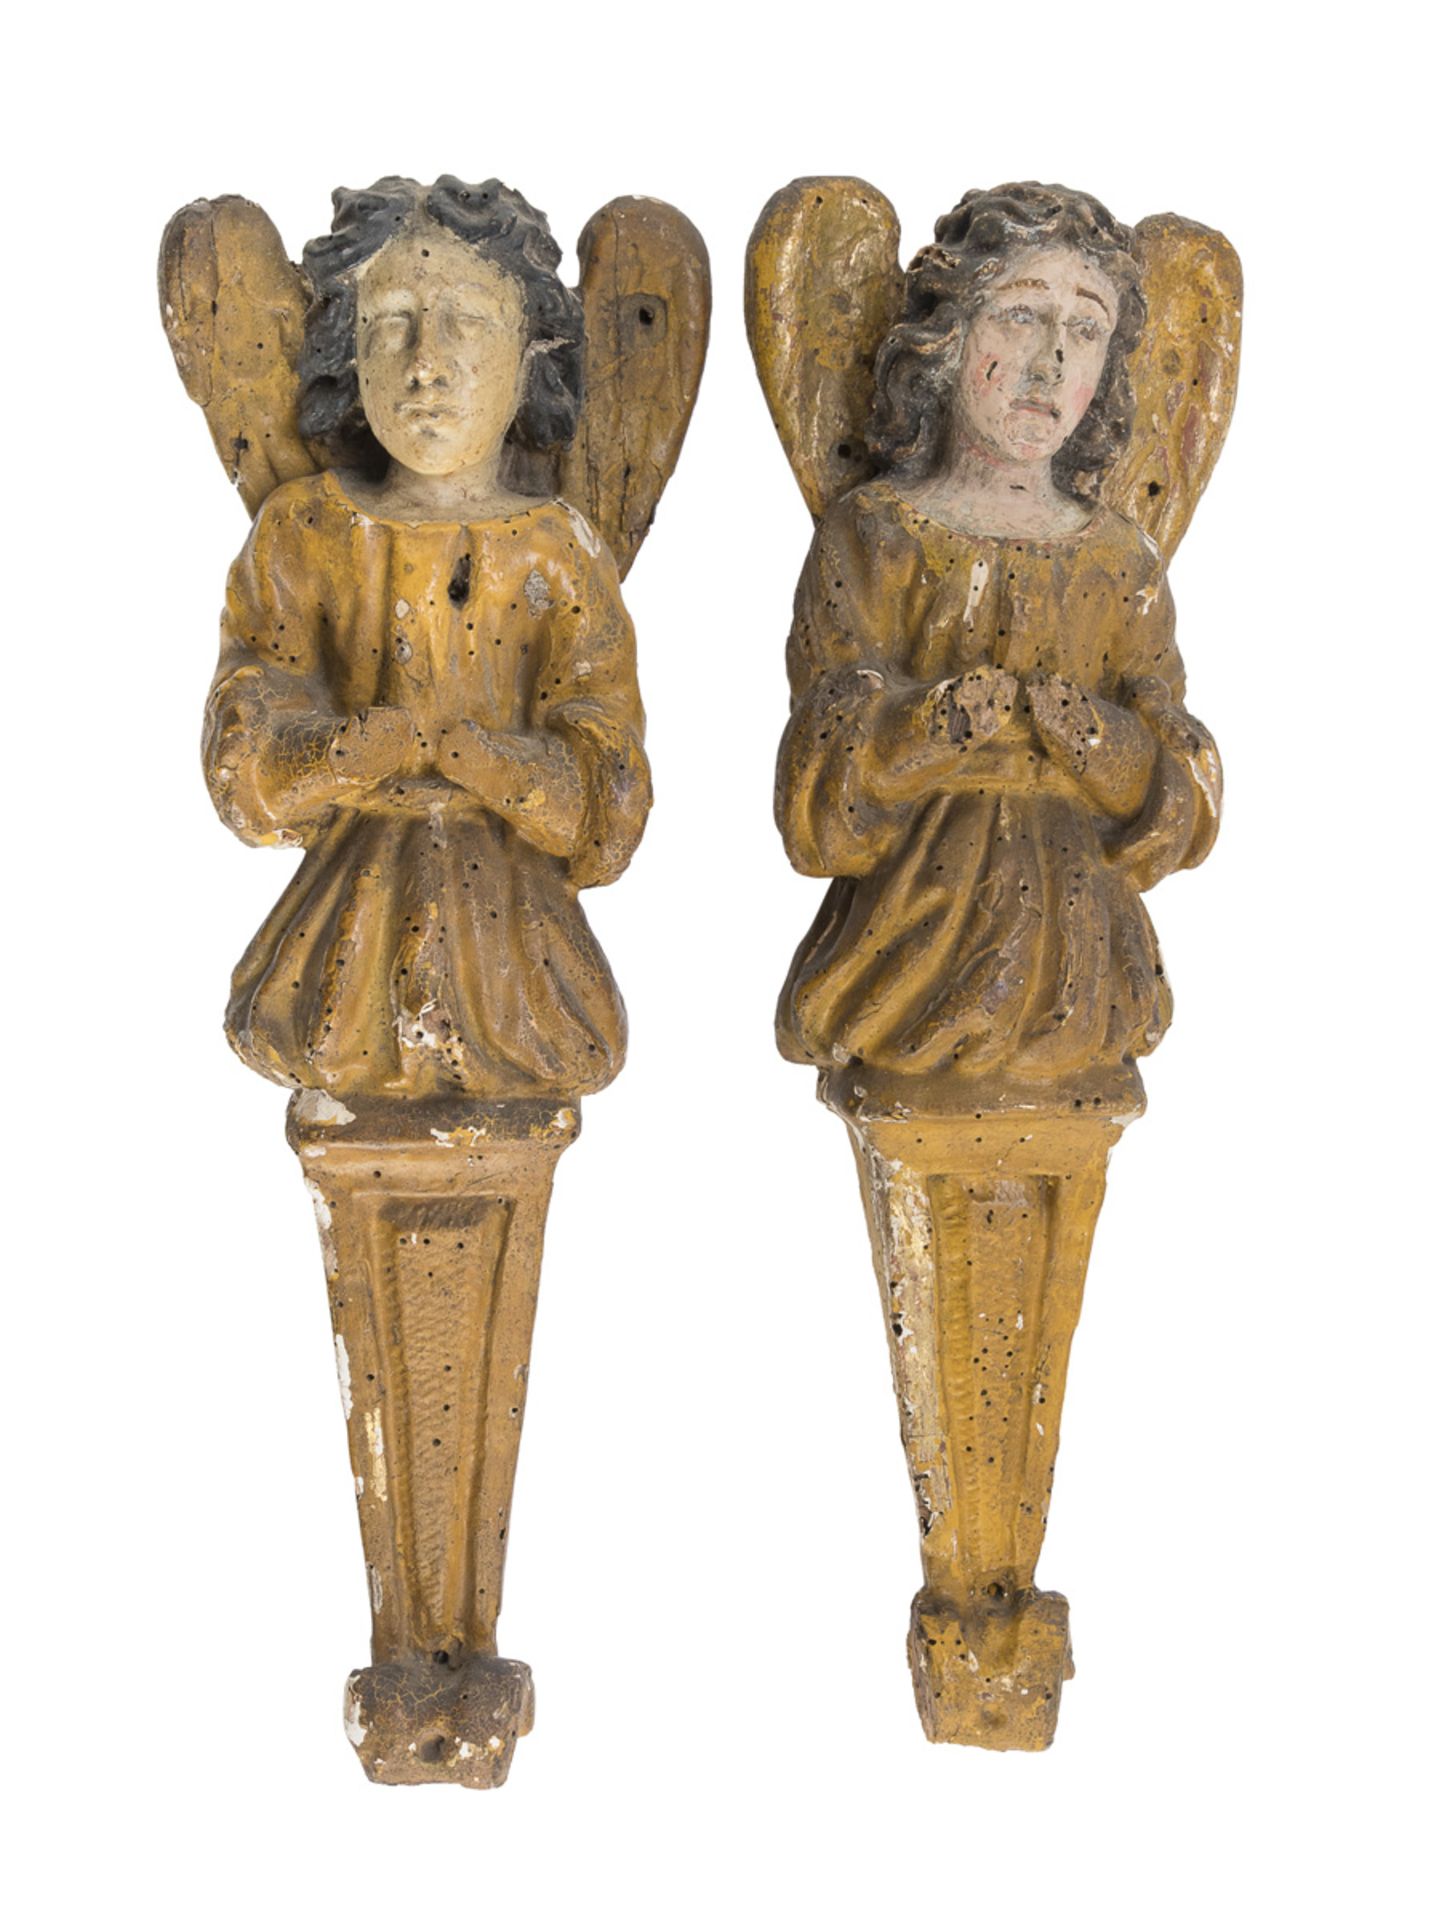 PAIR OF LACQUERED WOOD PILASTER 17TH CENTURY